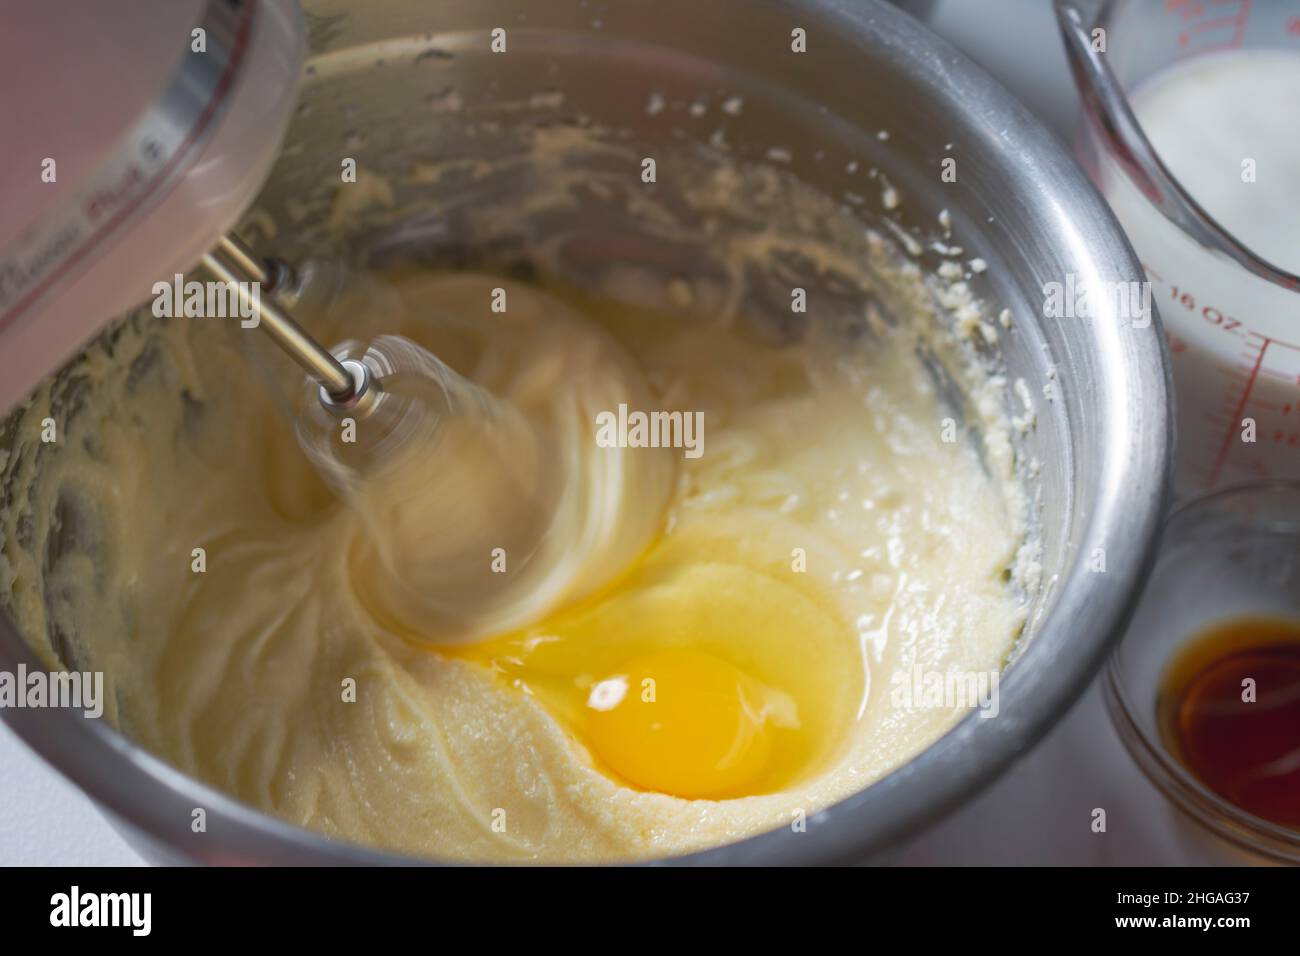 Making of a cake: Adding an egg and beating batter.  Mixer beaters showing motion blur.  Milk and vanilla in background. Stock Photo